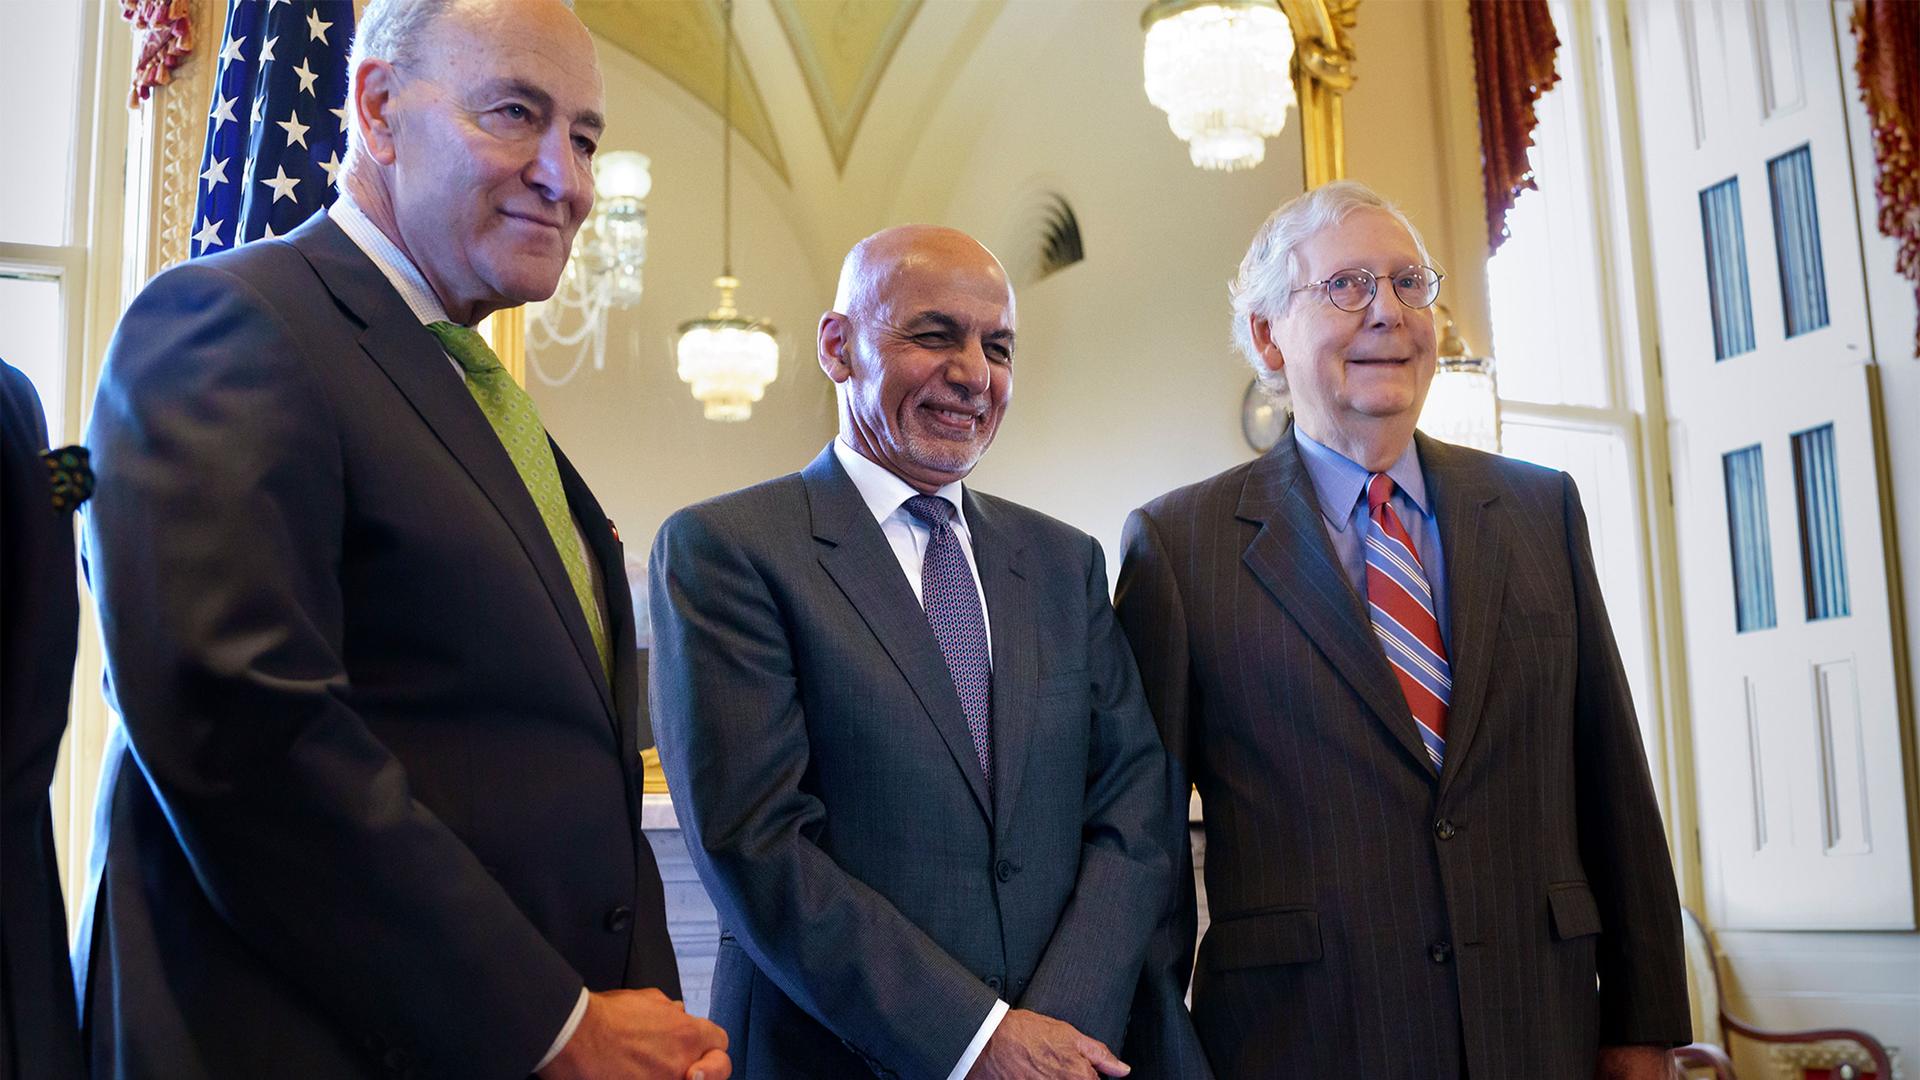 Senate Majority Leader Chuck Schumer, President of Afghanistan Ashraf Ghani and Senate Minority Leader Mitch McConnell stand together at the Capitol